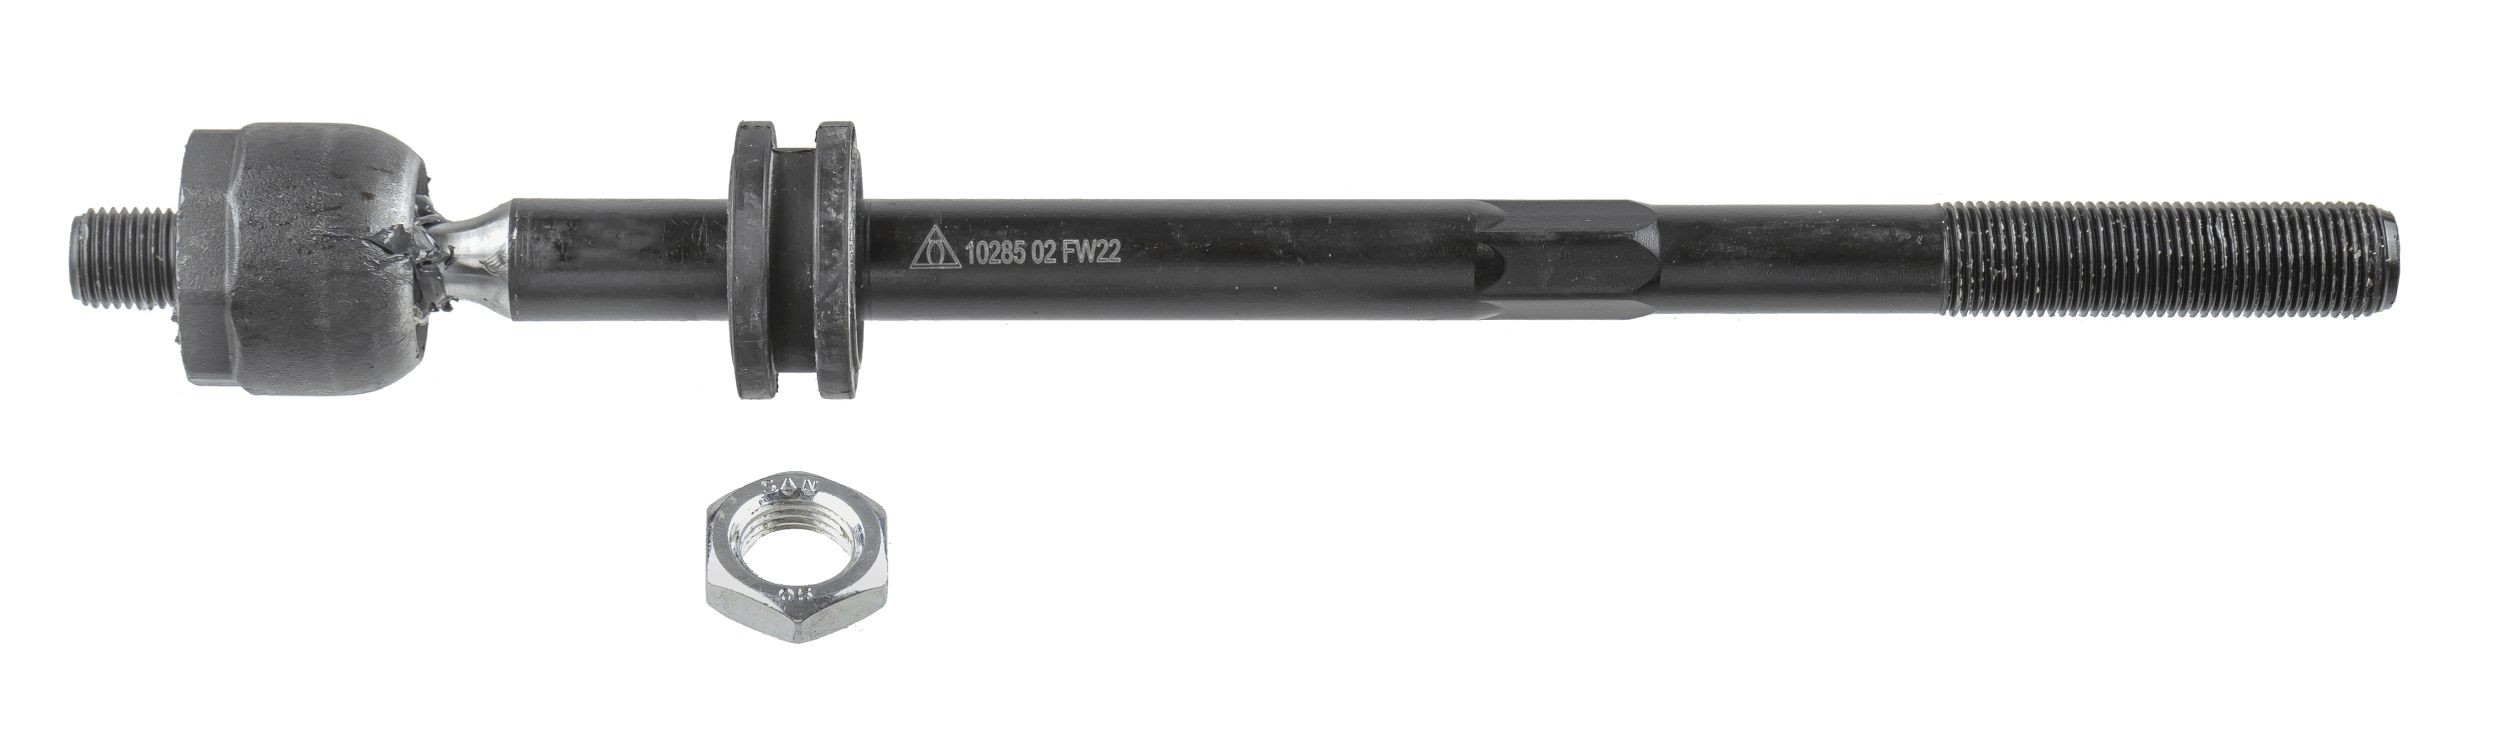 LEMFÖRDER Front Axle, both sides, inner, M14x1,5, 276 mm Tie rod axle joint 10285 02 buy